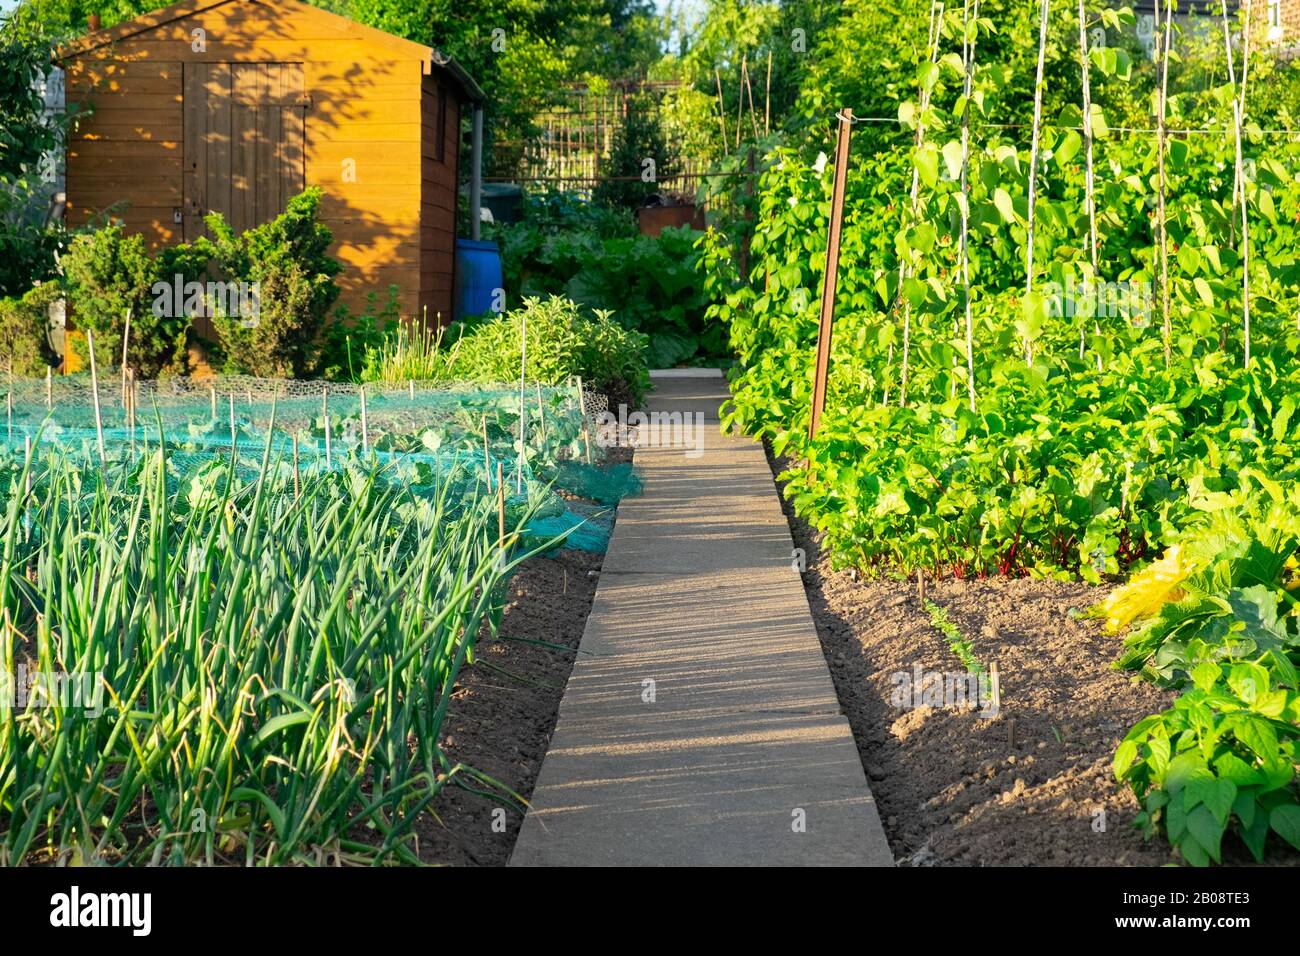 Vegetable garden on allotment with shed, path, vegetables growing Stock Photo